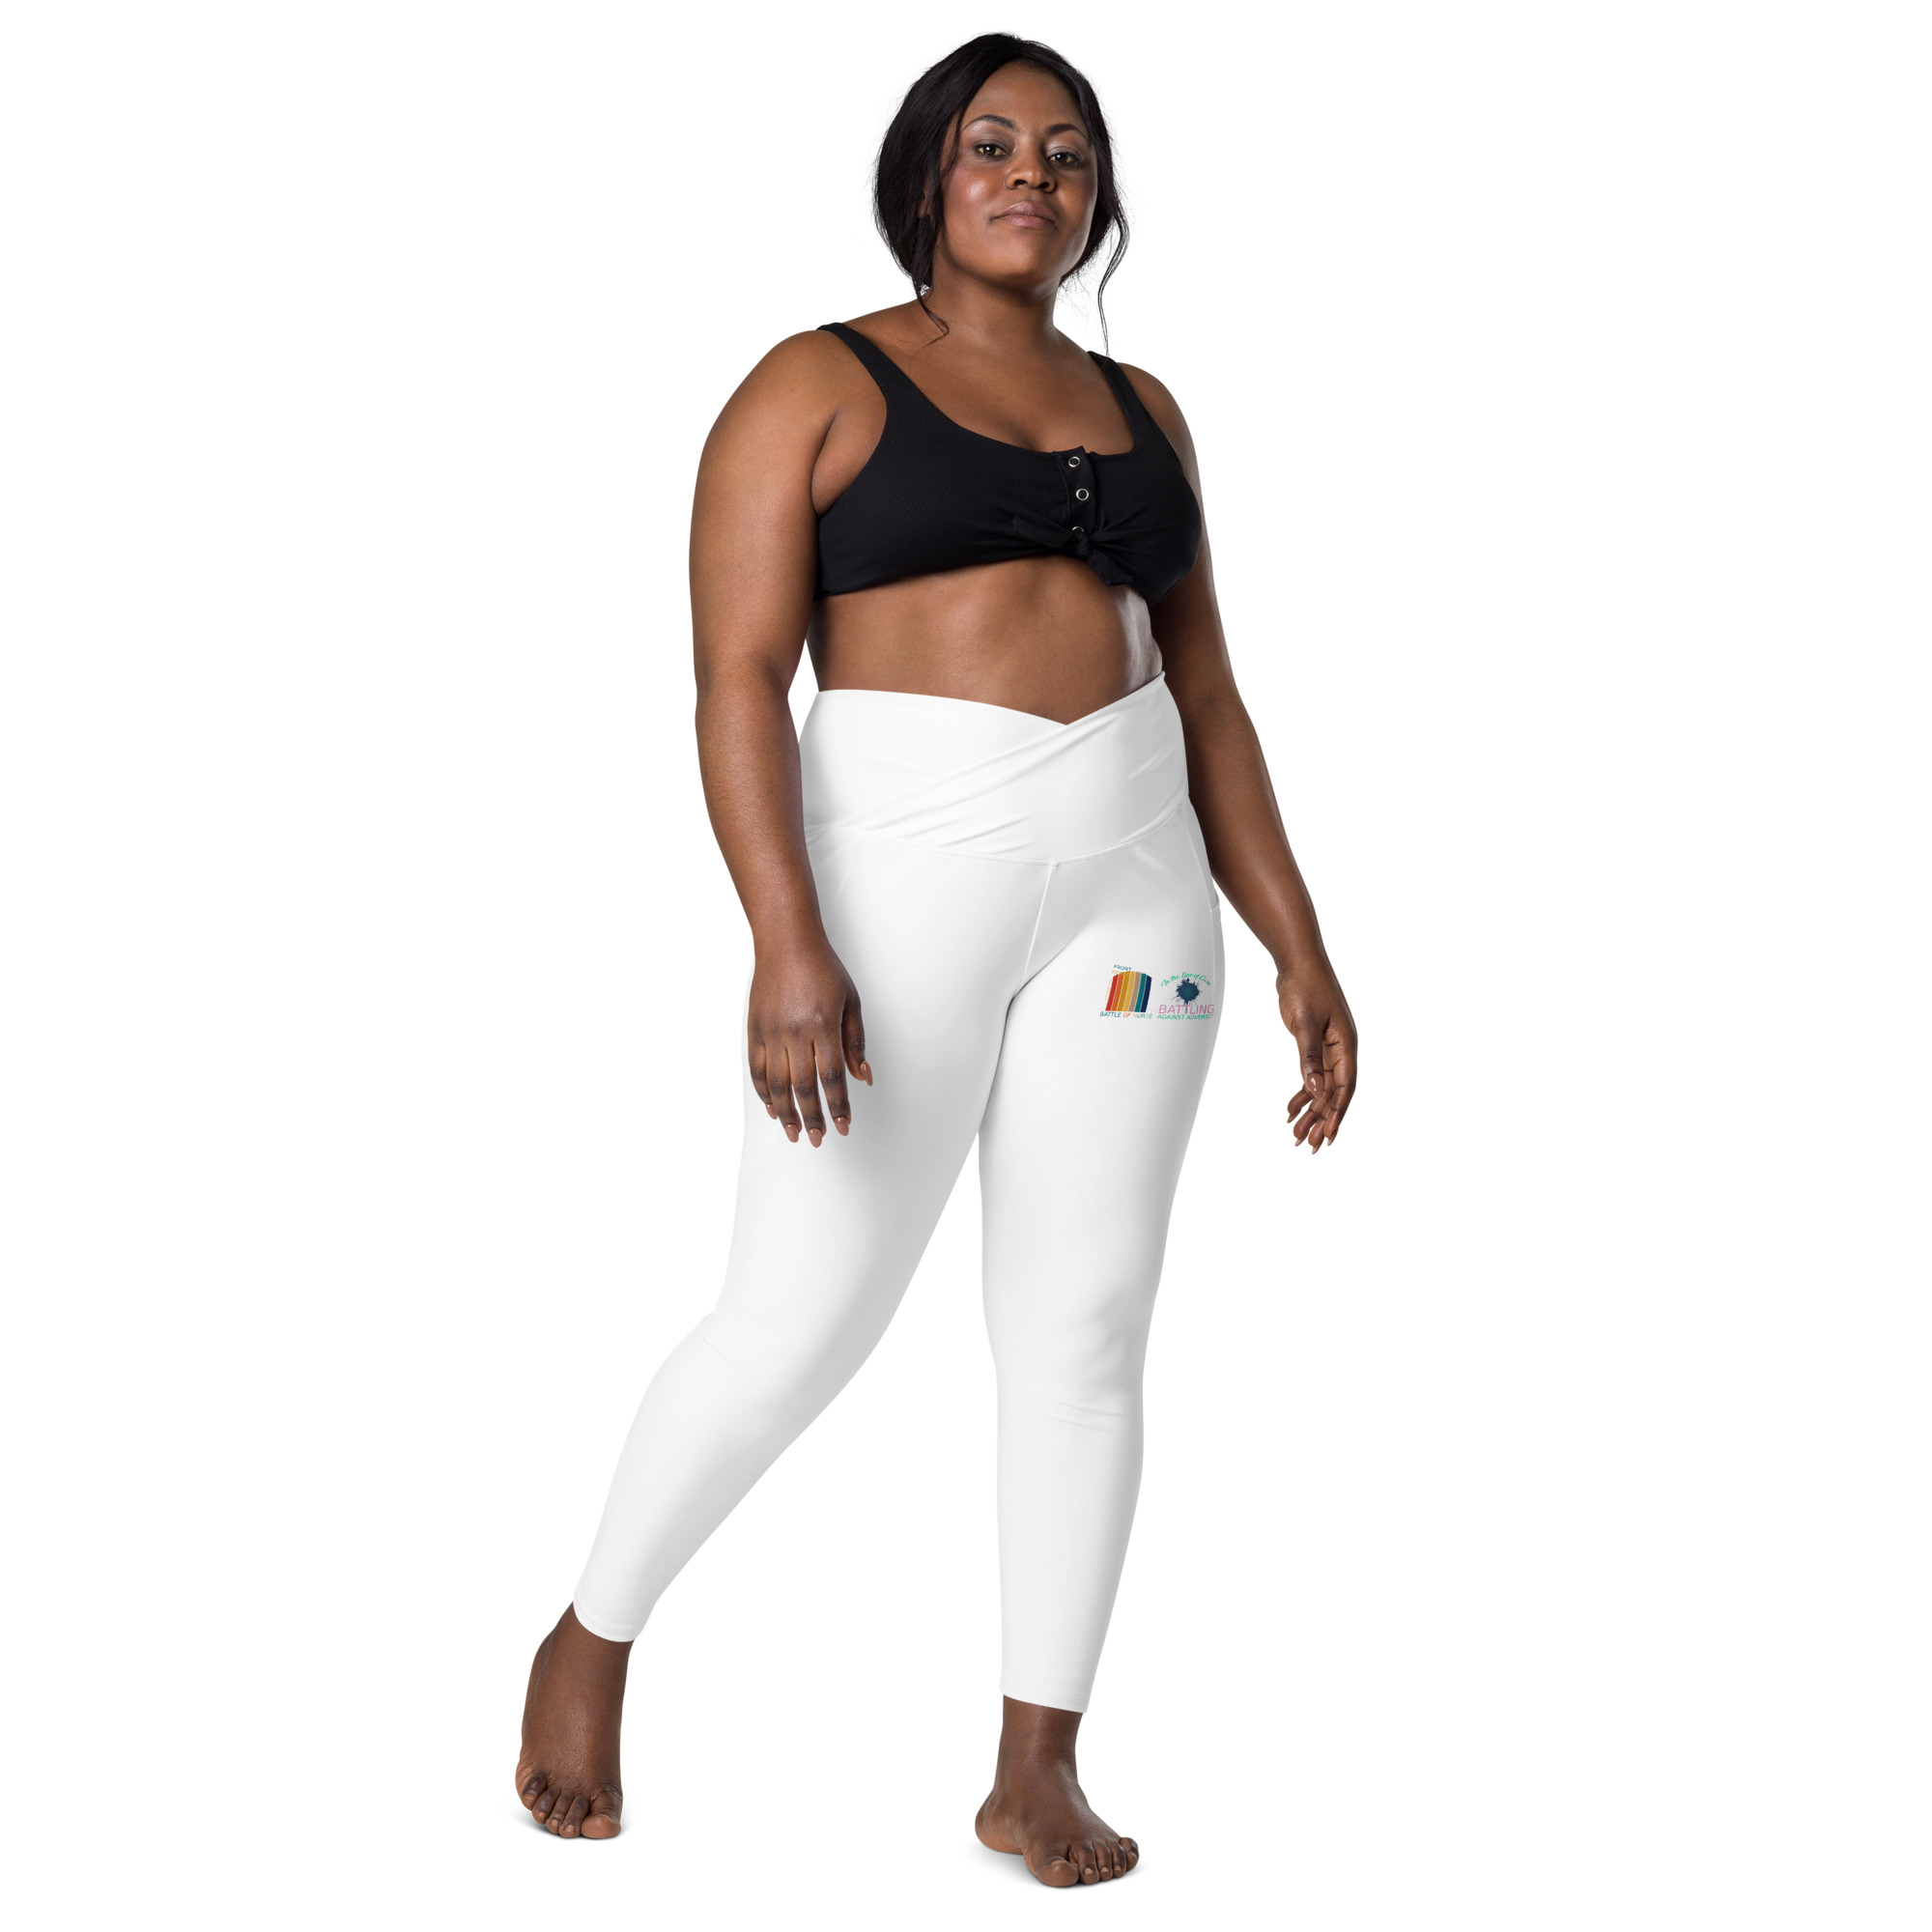 Crossover leggings with pockets - Donatello School of Nursing and